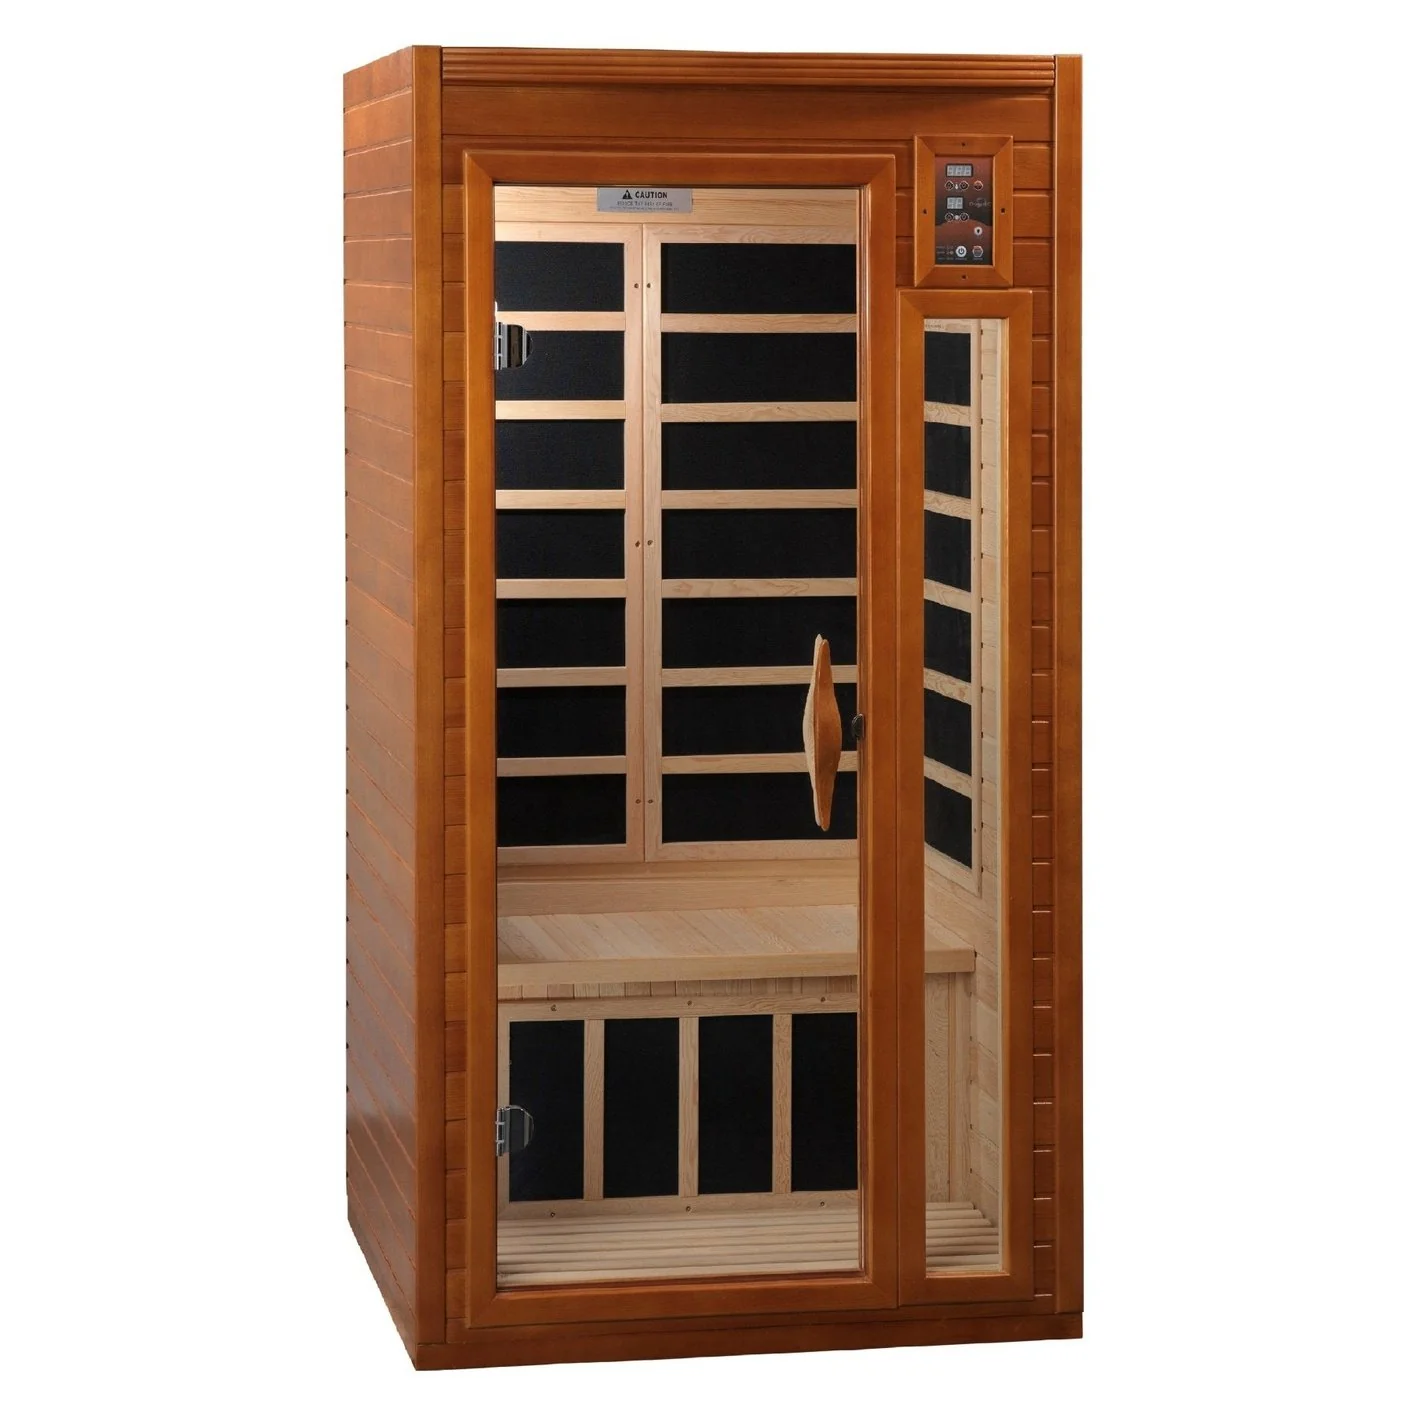 Barcelona Elite, a mahogany-brown 1–2 person infrared sauna with a glass door